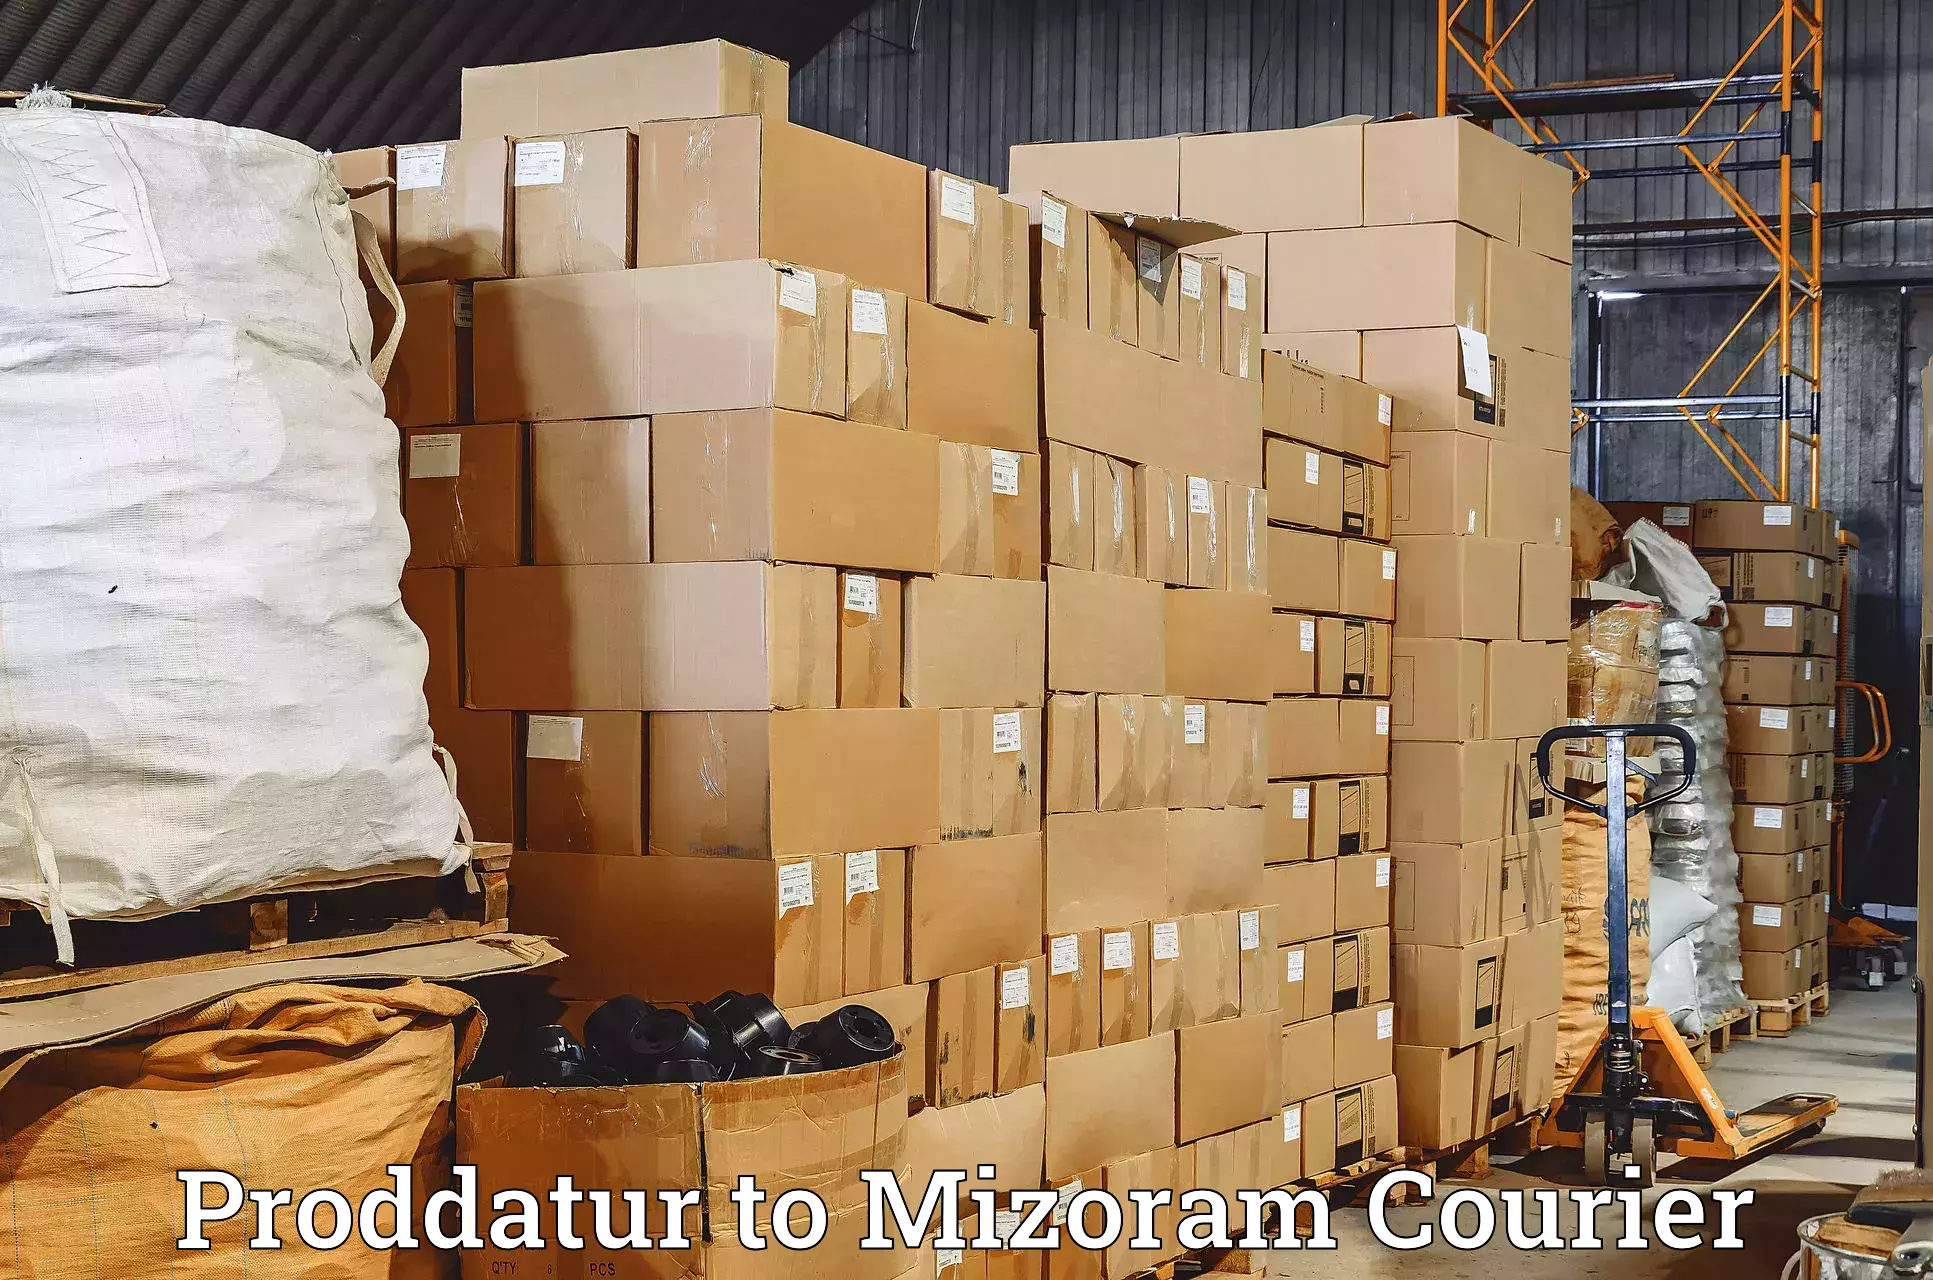 Online shipping calculator Proddatur to Darlawn